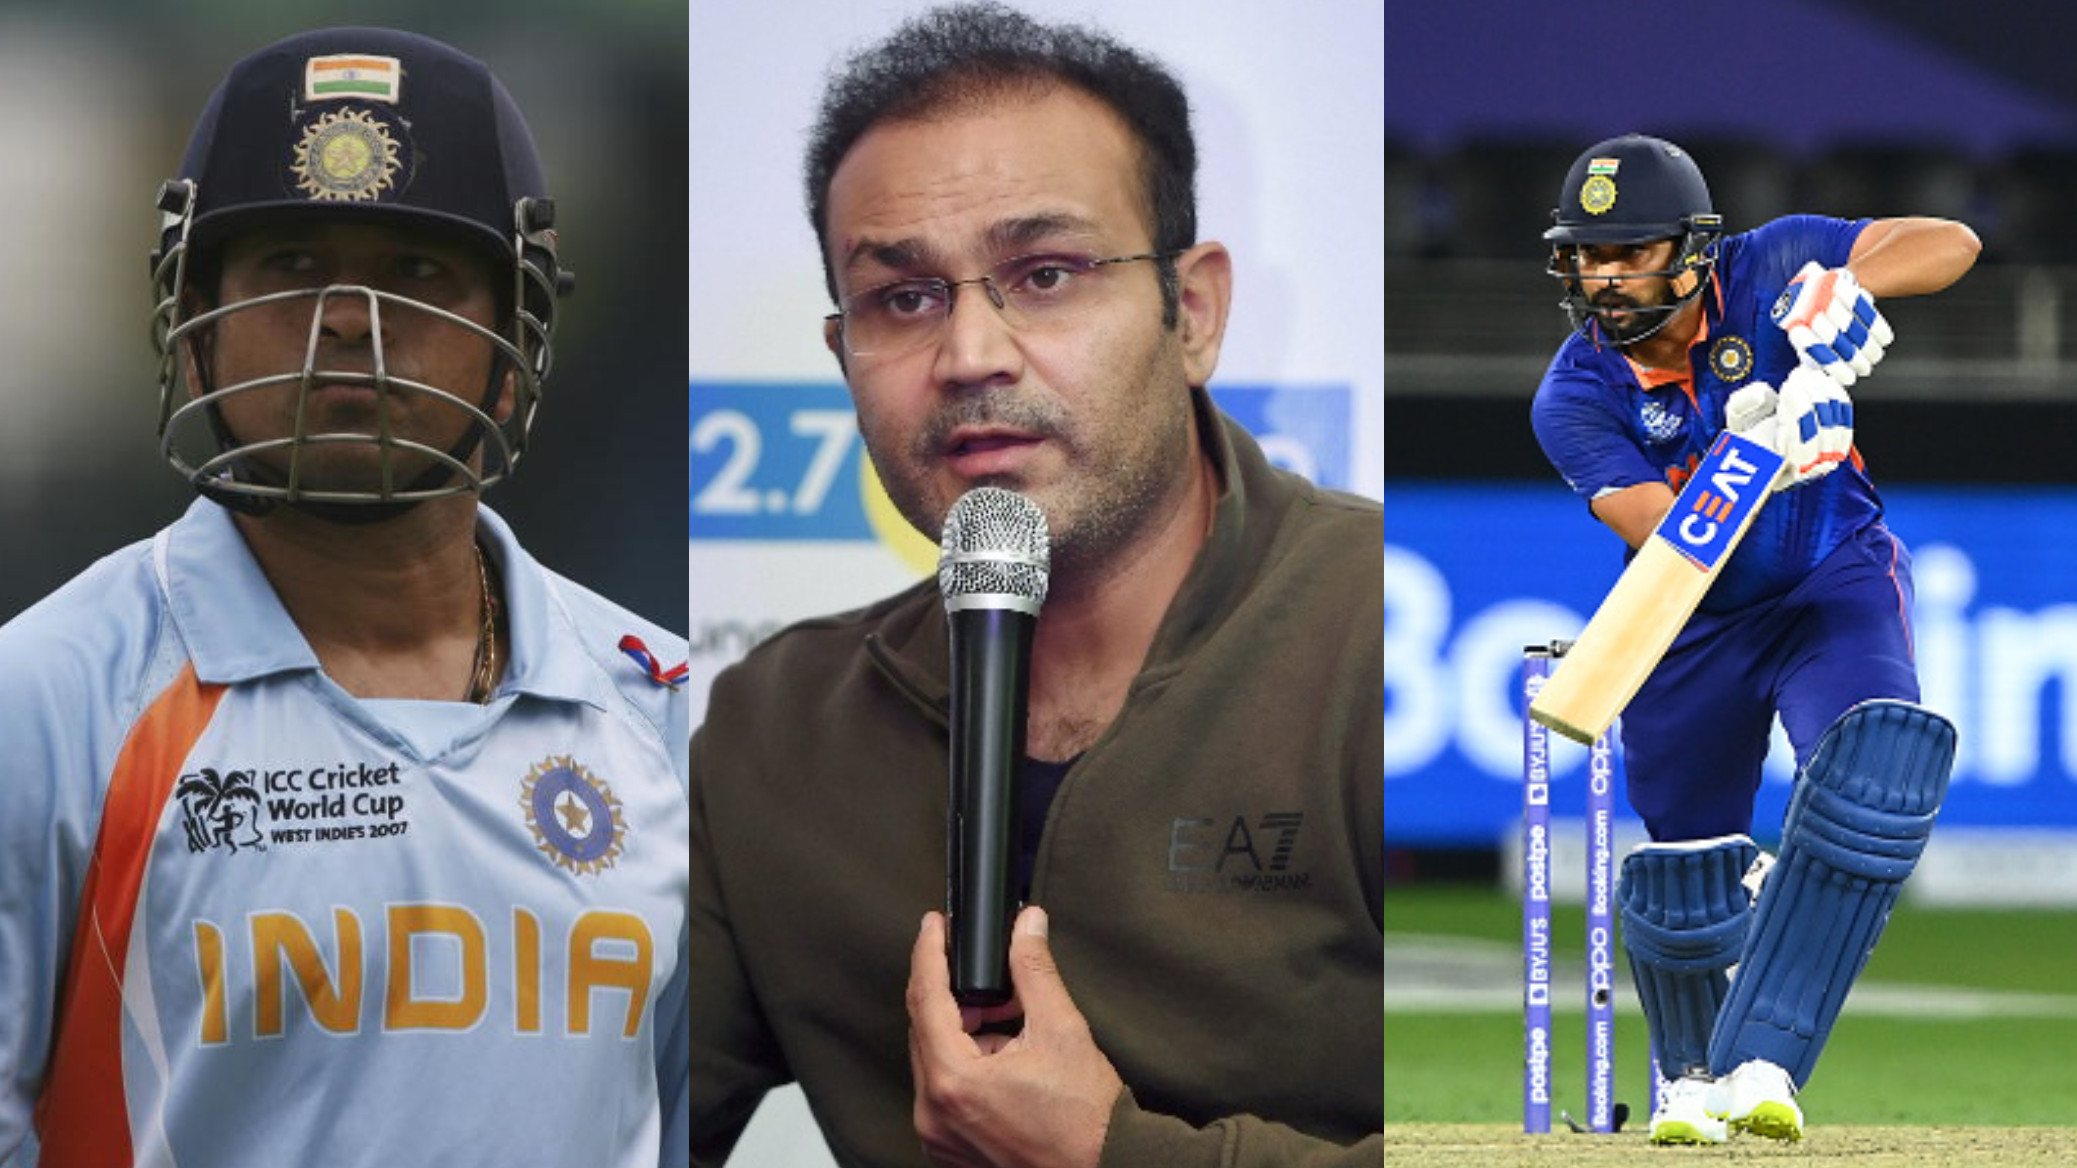 T20 World Cup 2021: Sehwag says Rohit’s demotion in batting order was mistake like Sachin batting at 4 in 2007 WC